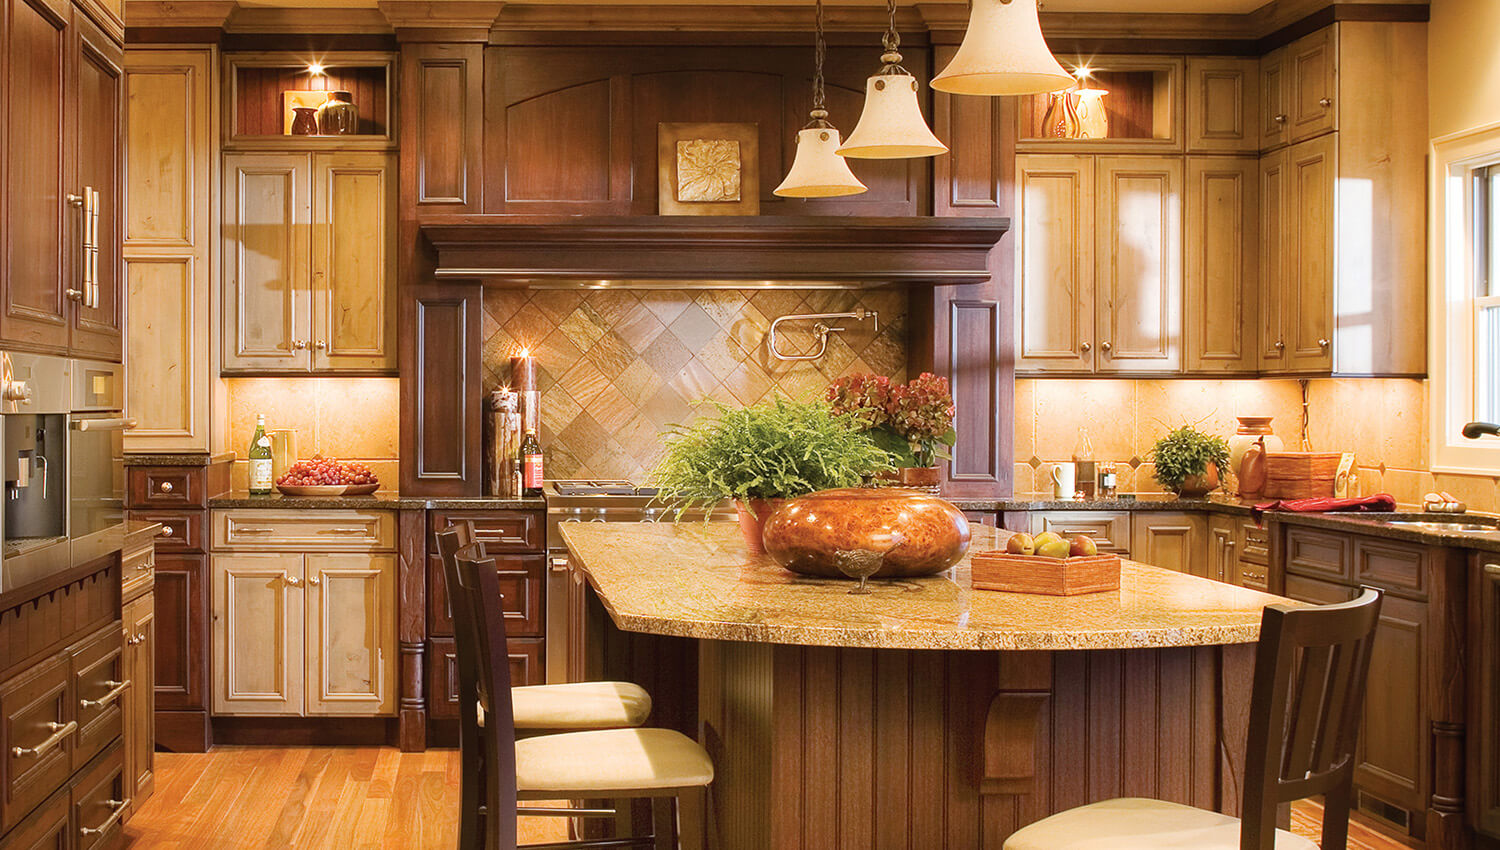 A rustic kitchen design with a mix of woods and stained finishes.